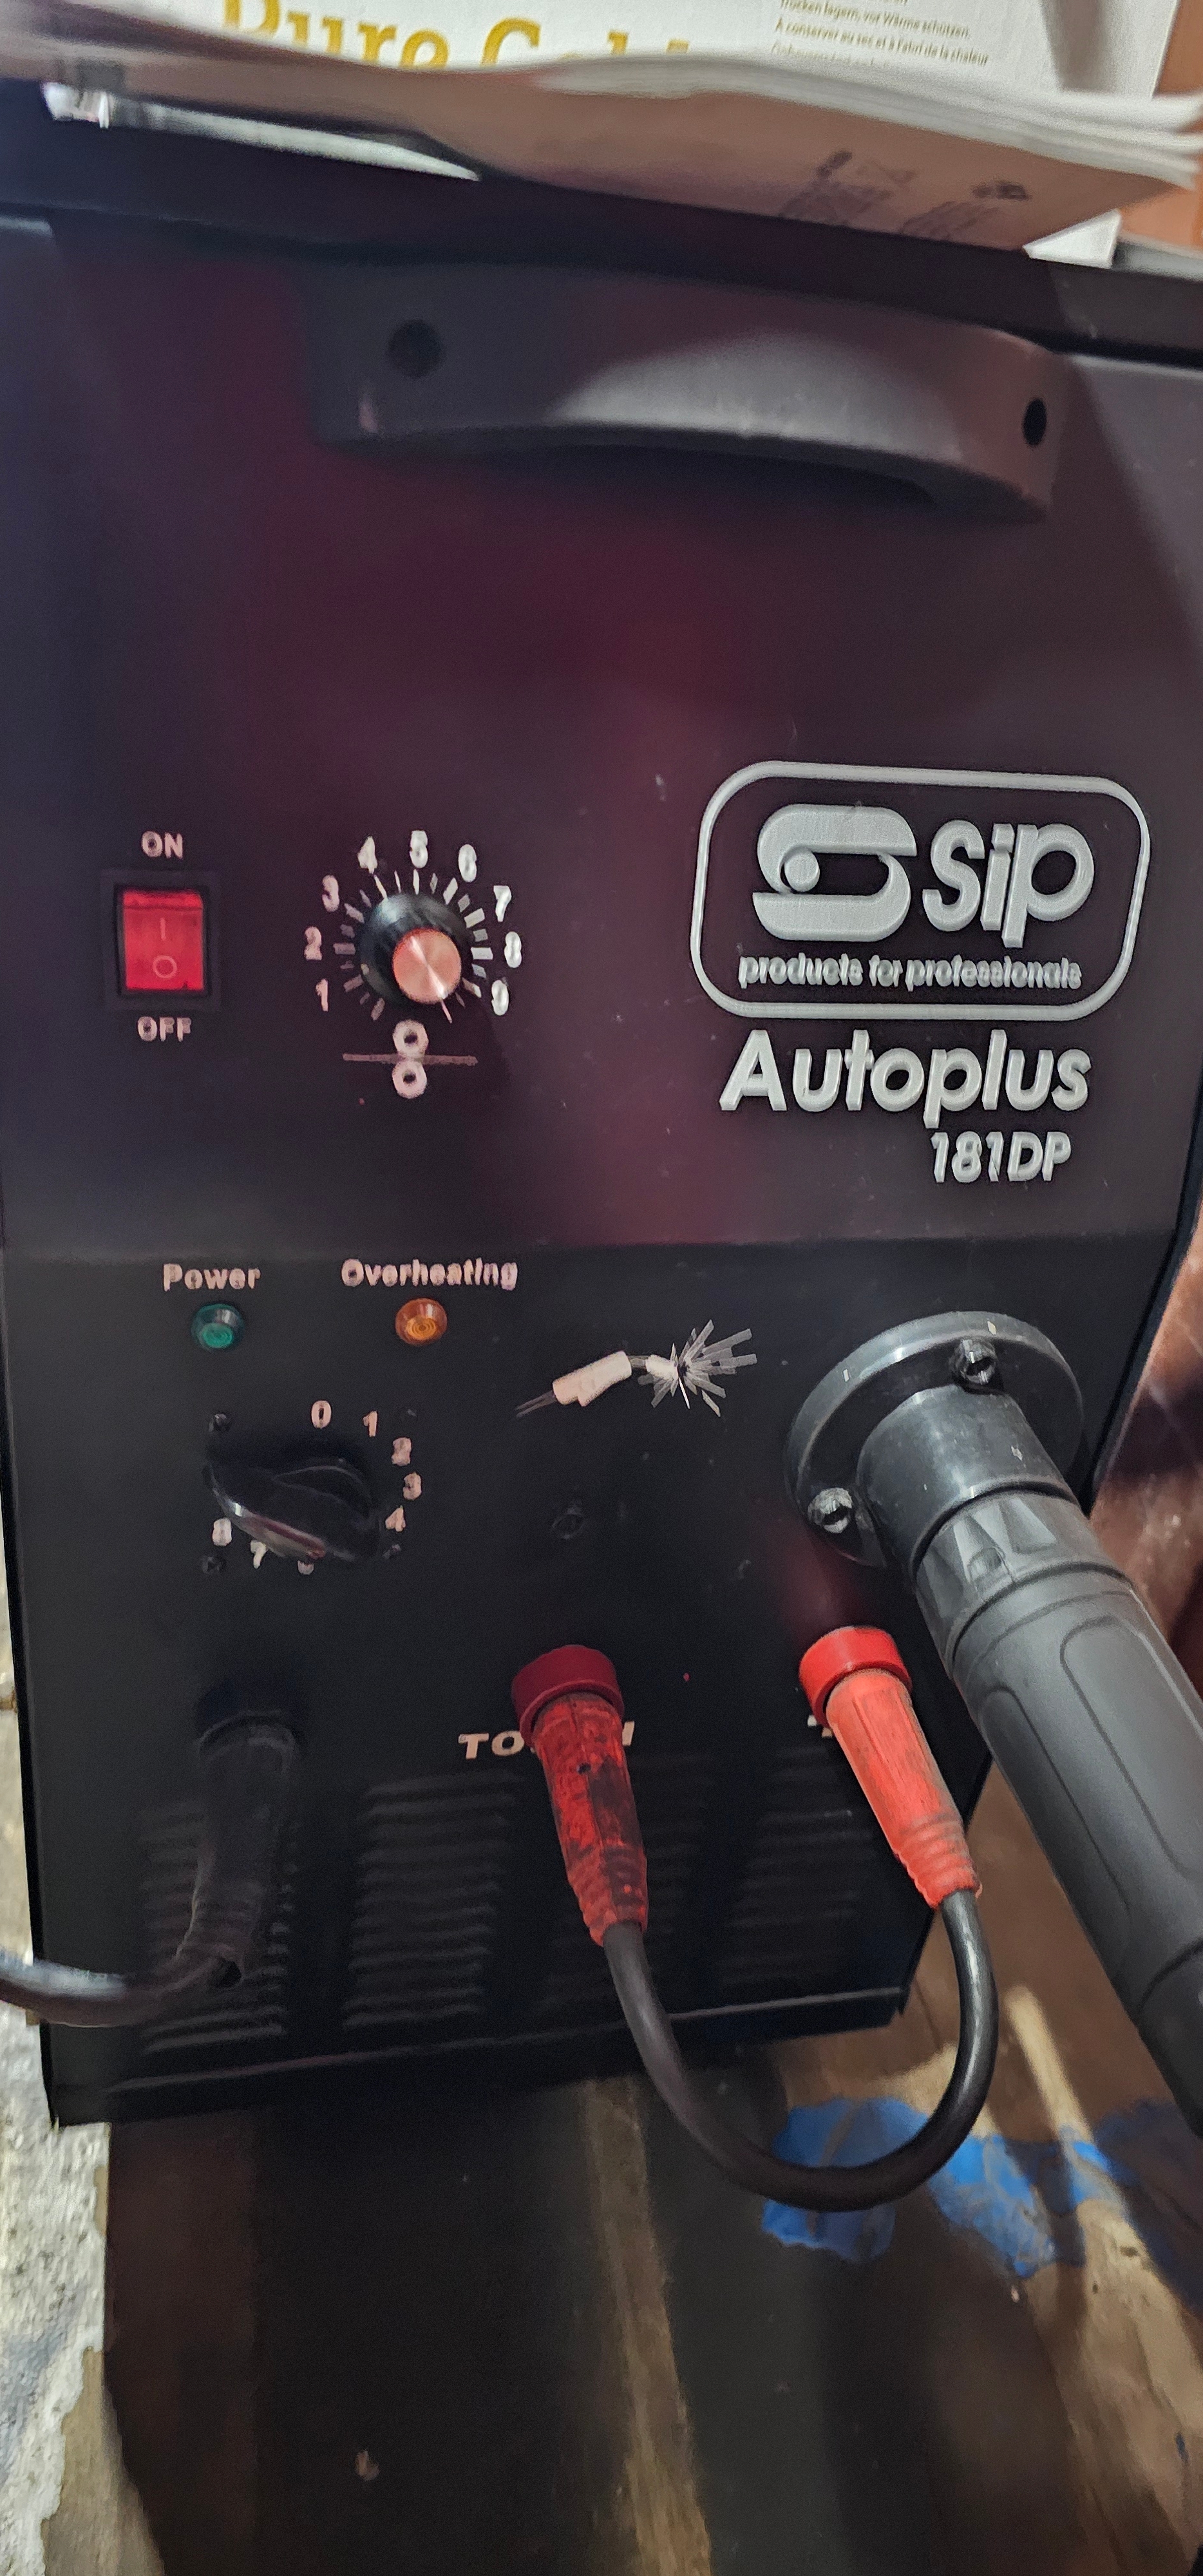 A SIP autoplus 181DP gas welder, Mig or gasless modes ,with instructions. - Image 2 of 3